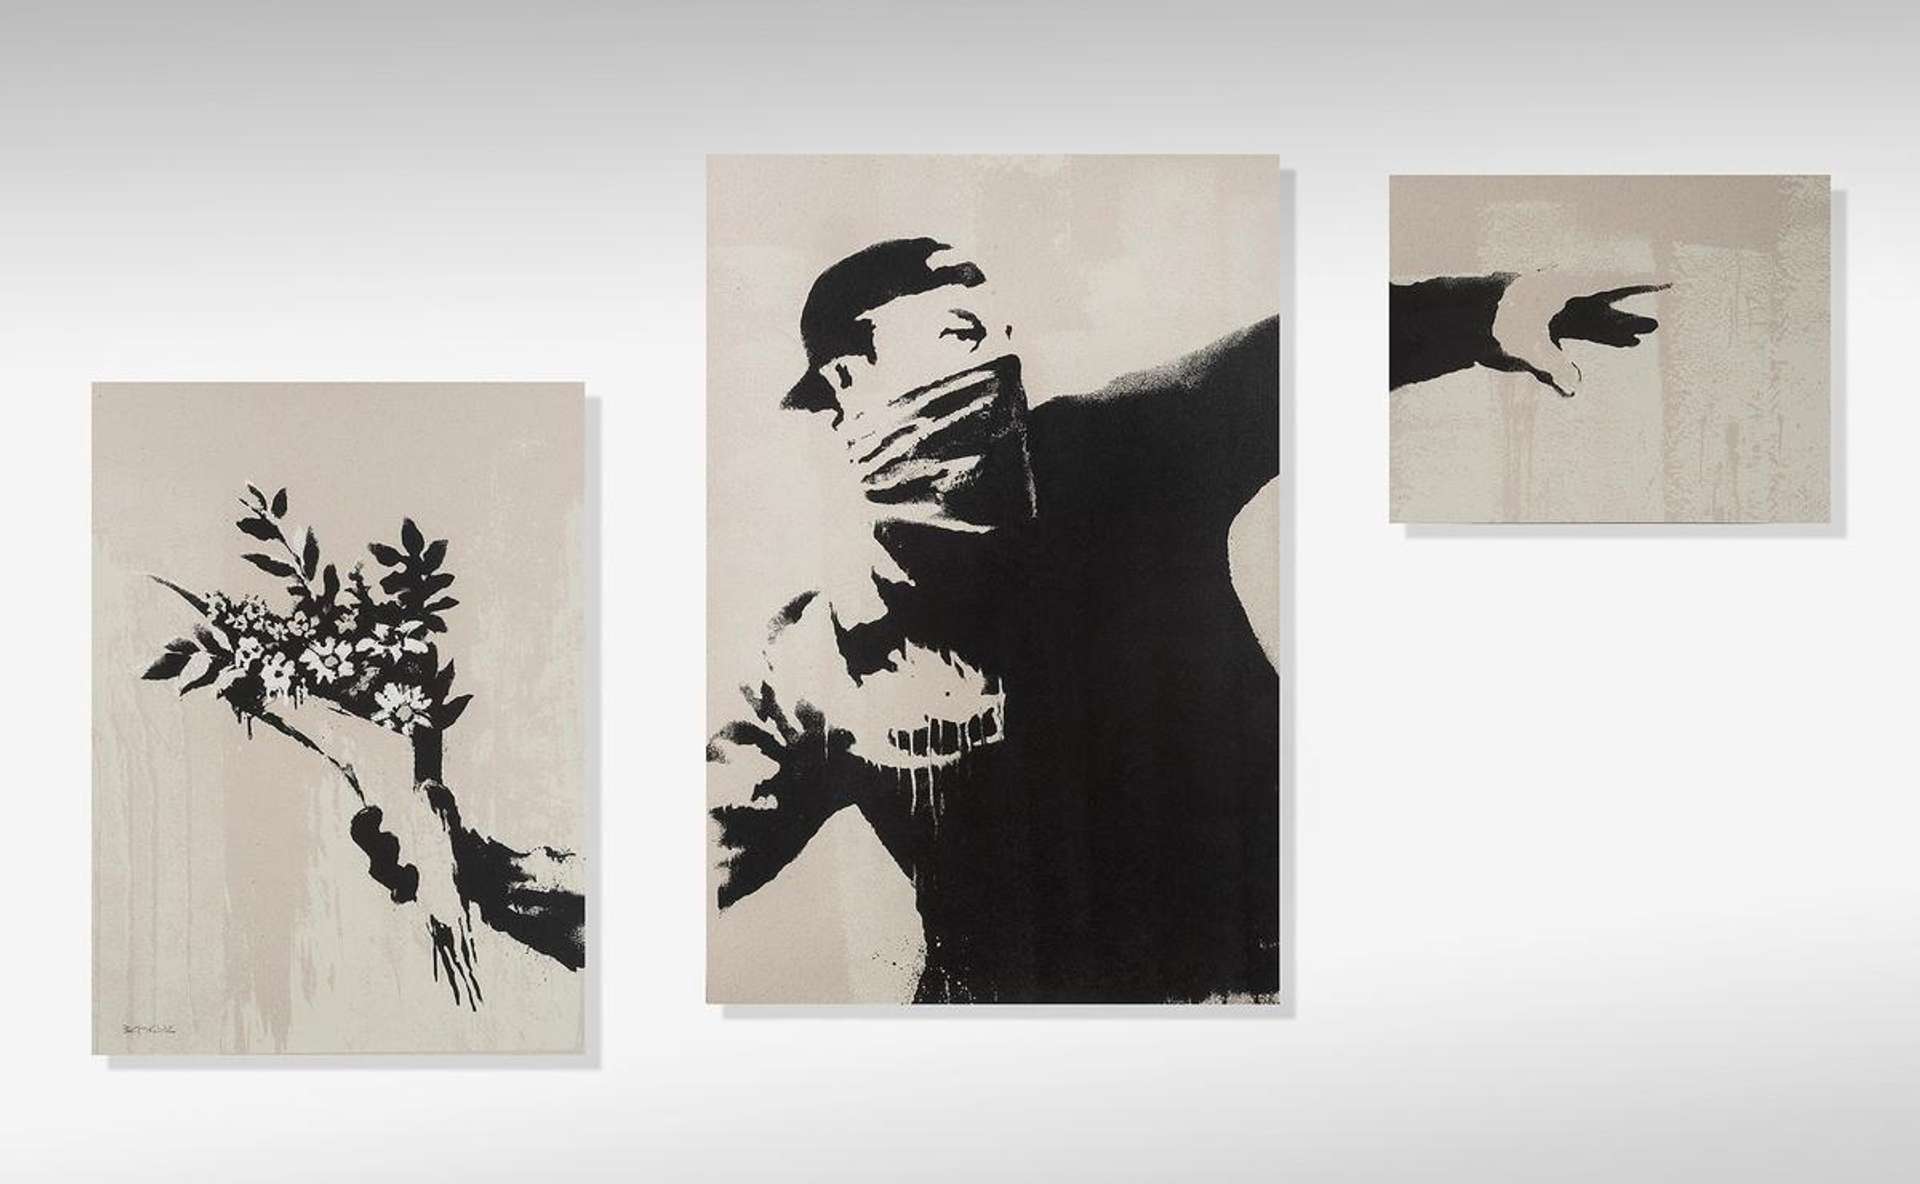 A triptych screenprint by Banksy depiction a man about to launch a bunch of flowers, spread across the three panels.